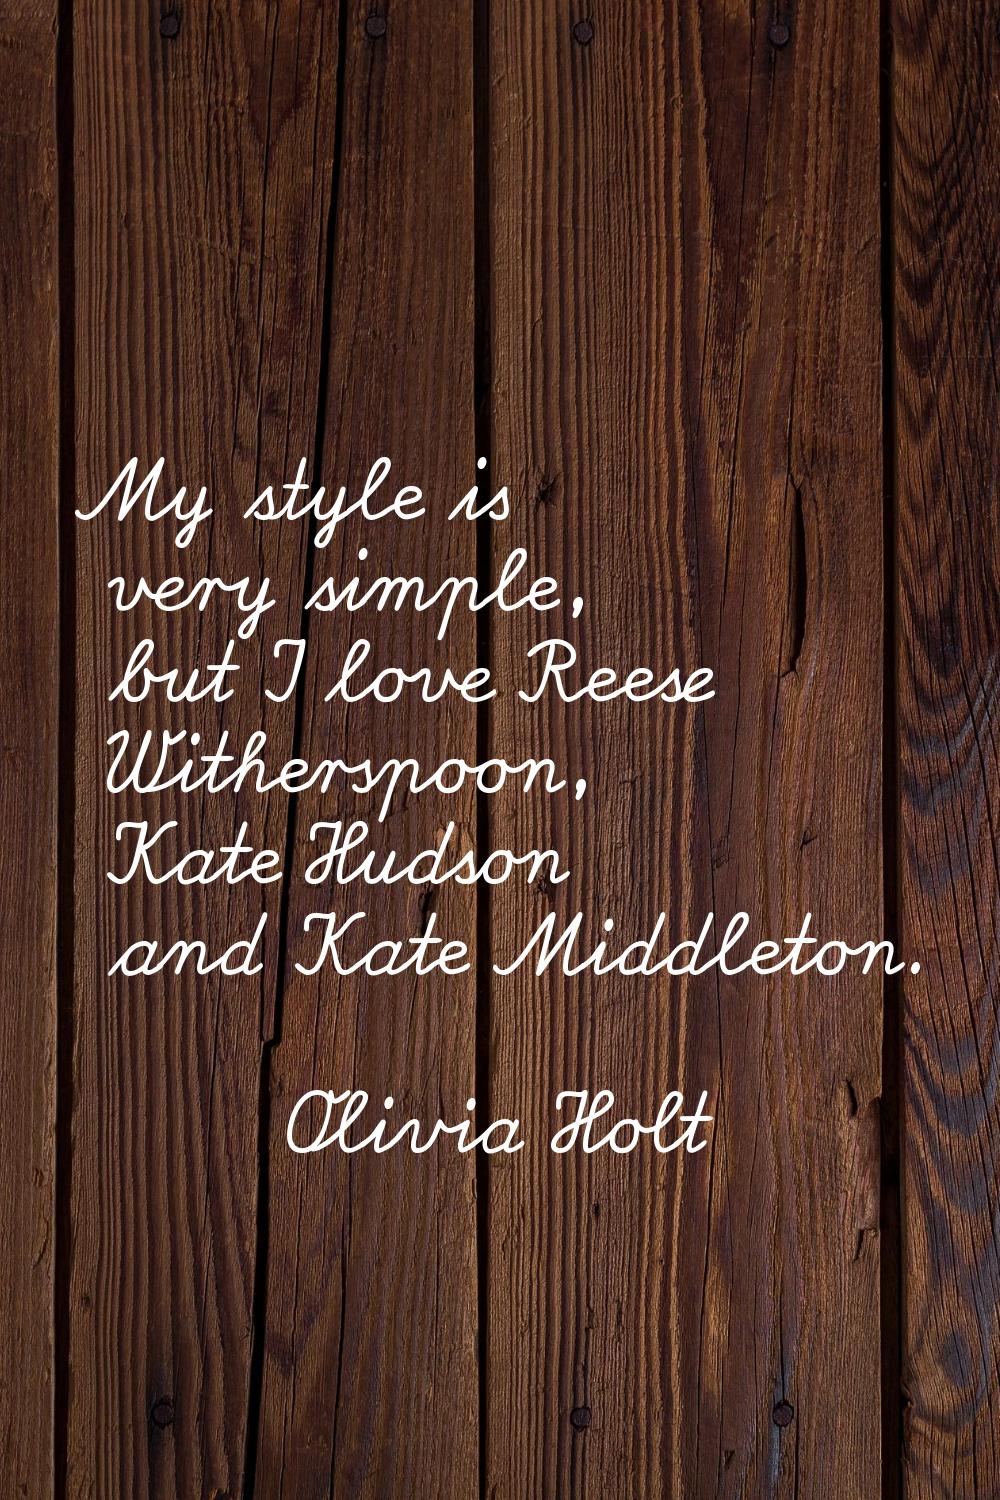 My style is very simple, but I love Reese Witherspoon, Kate Hudson and Kate Middleton.